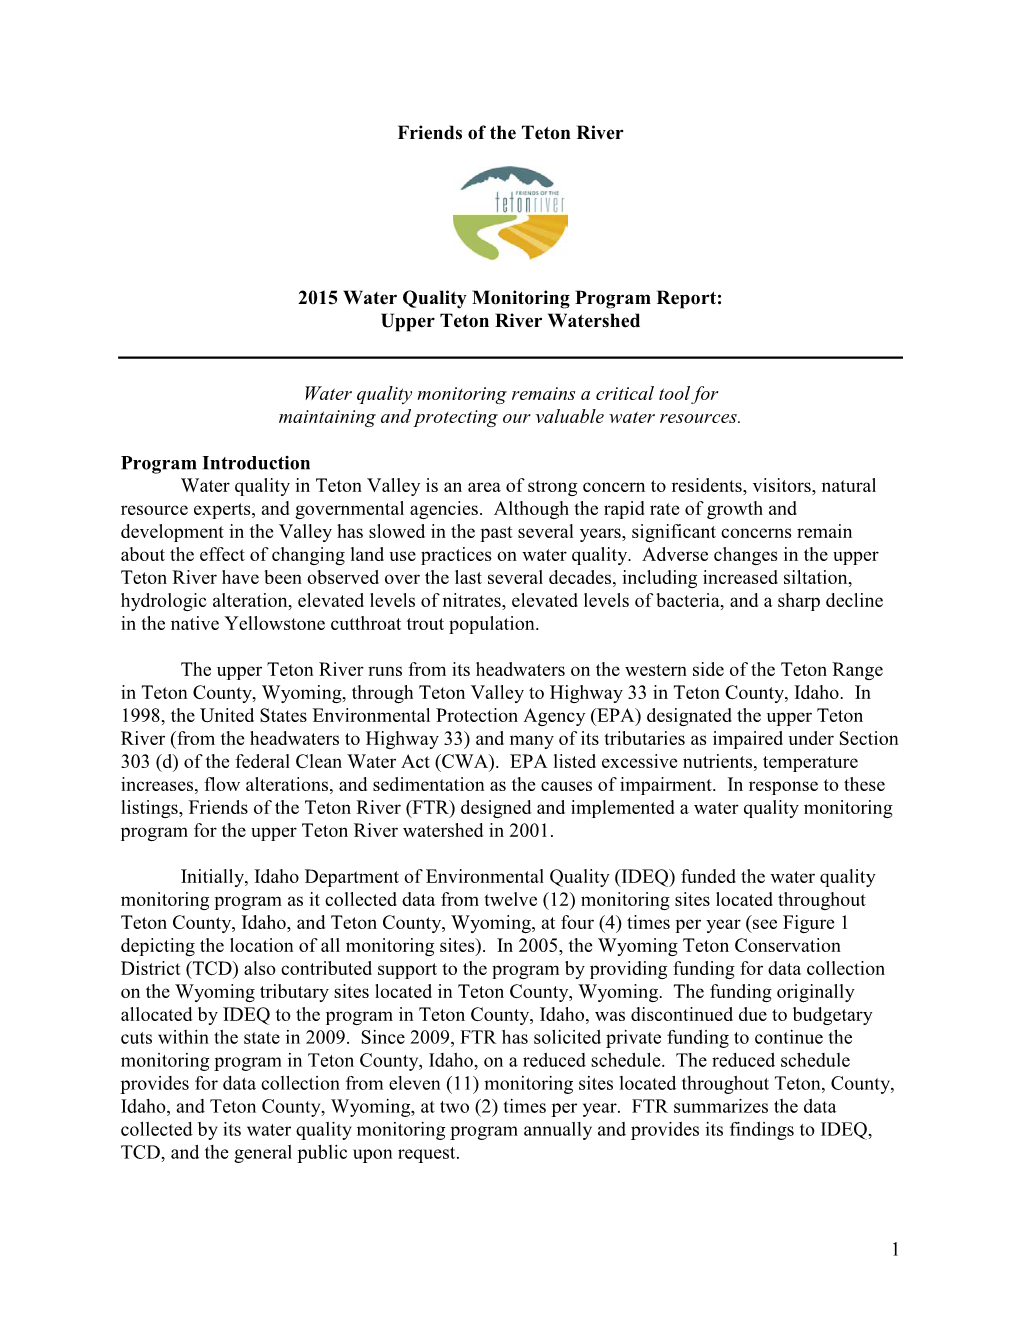 1 Friends of the Teton River 2015 Water Quality Monitoring Program